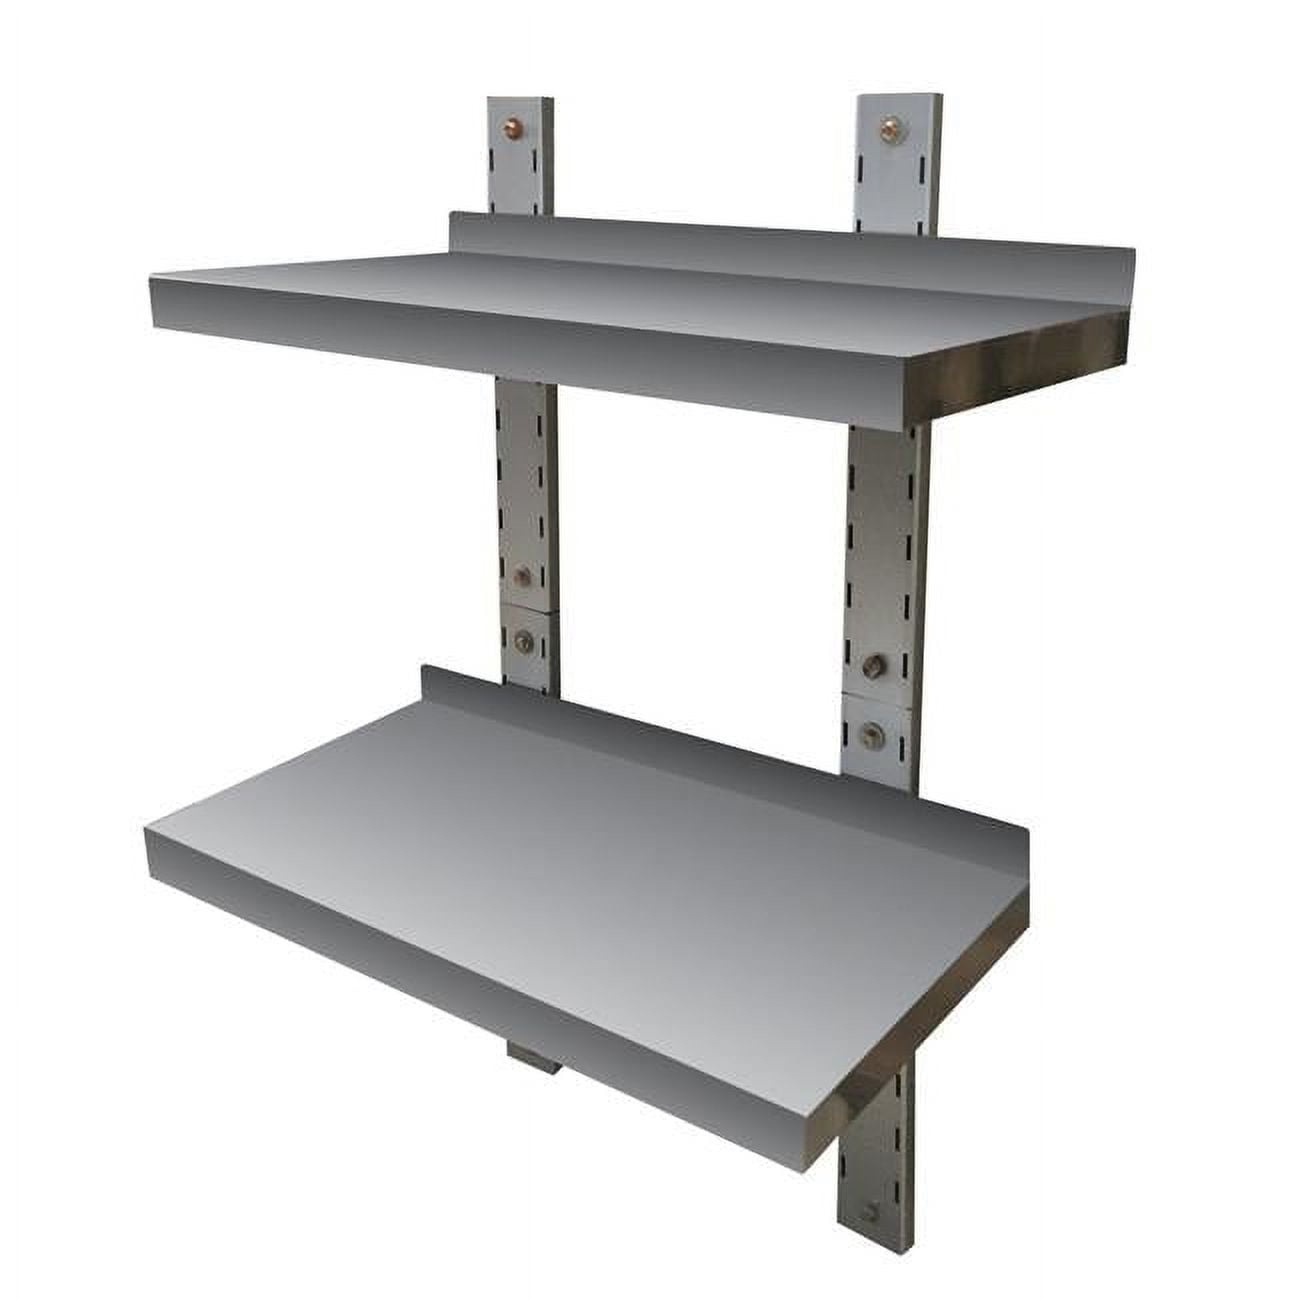 Picture of Sportsman Series SSDWMS Stainless Steel Double Wall Mount Shelf